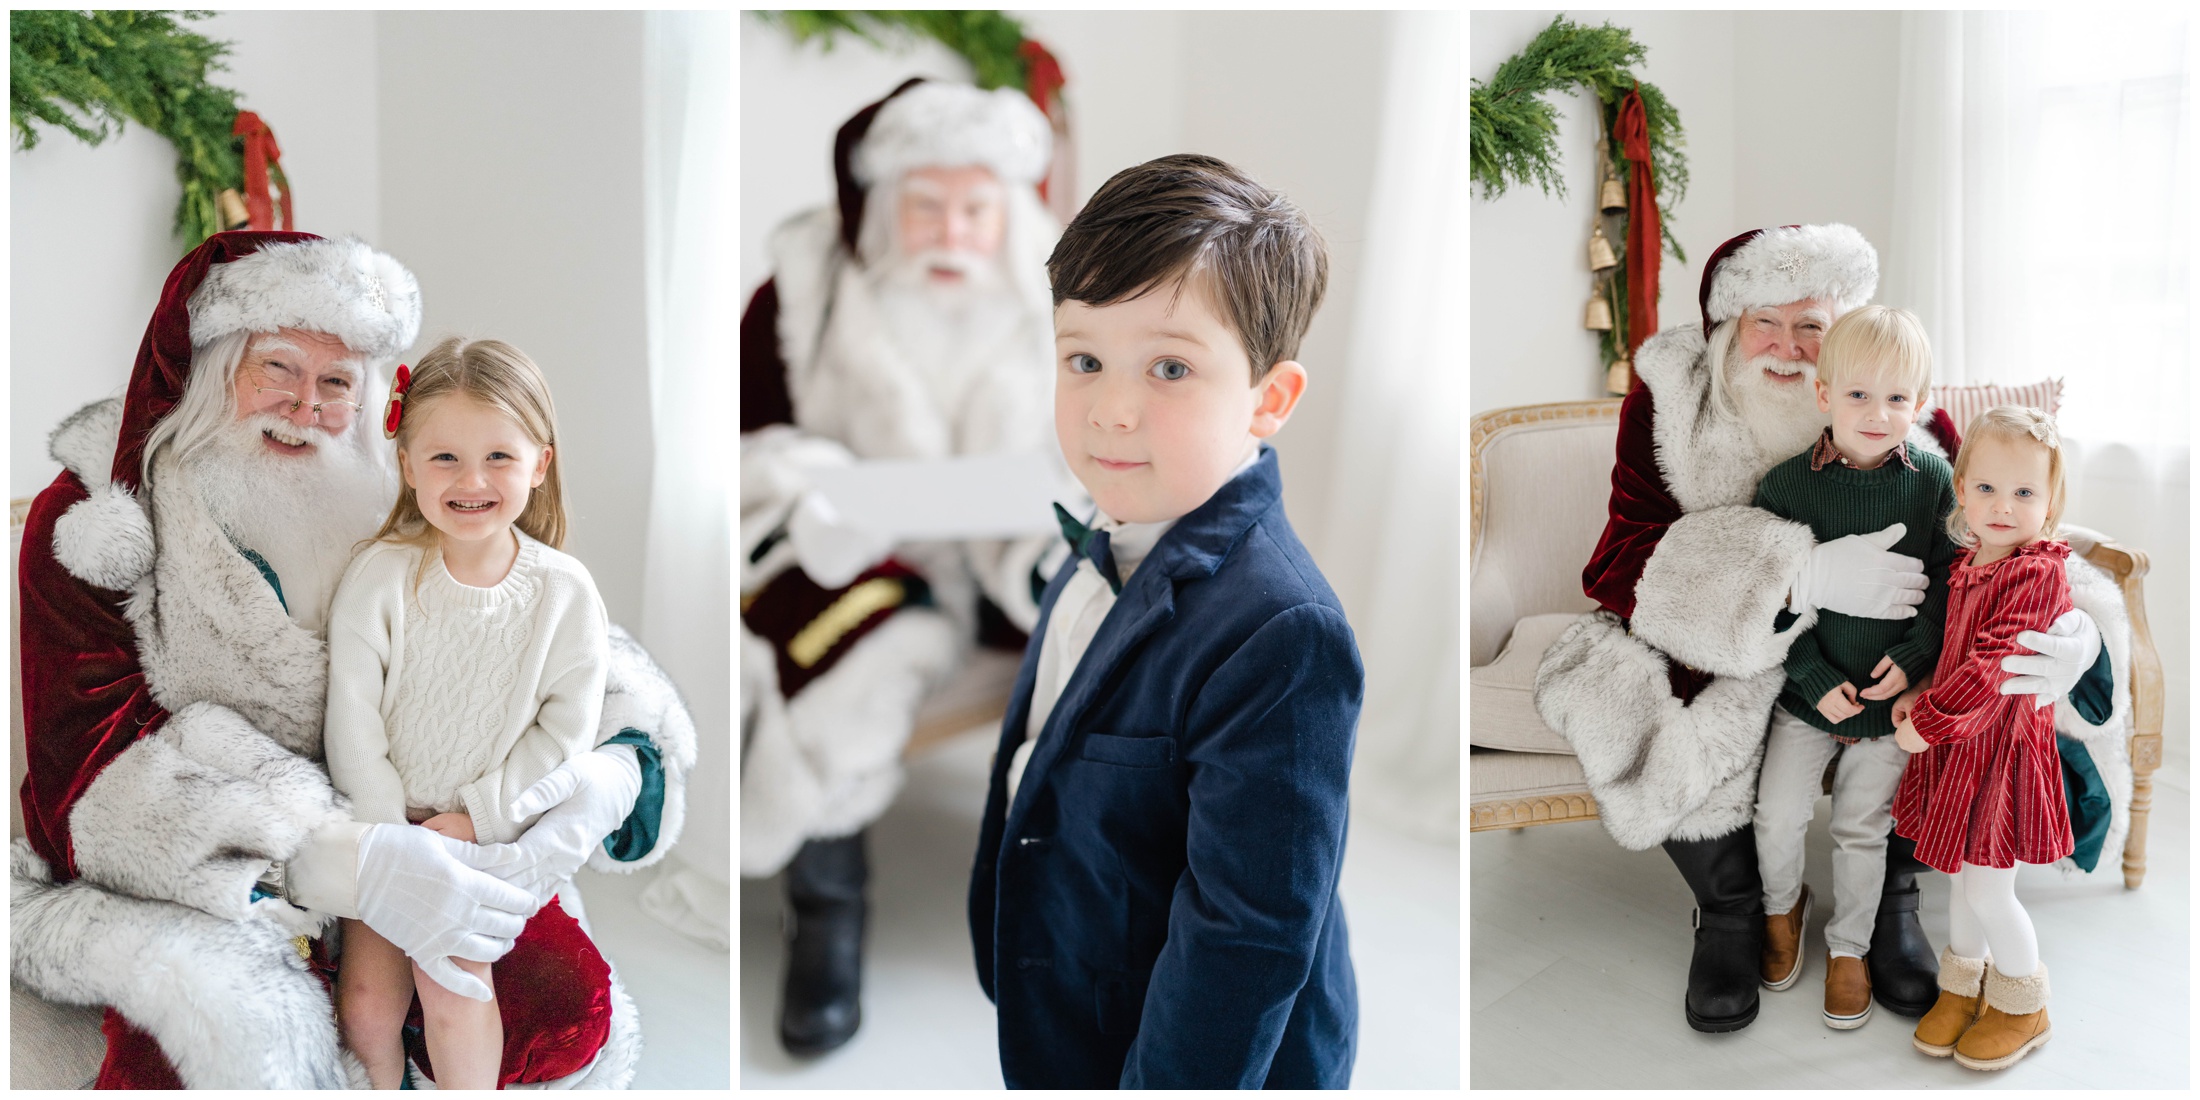 What to wear for photos with Santa: Portraits of Children with Santa.